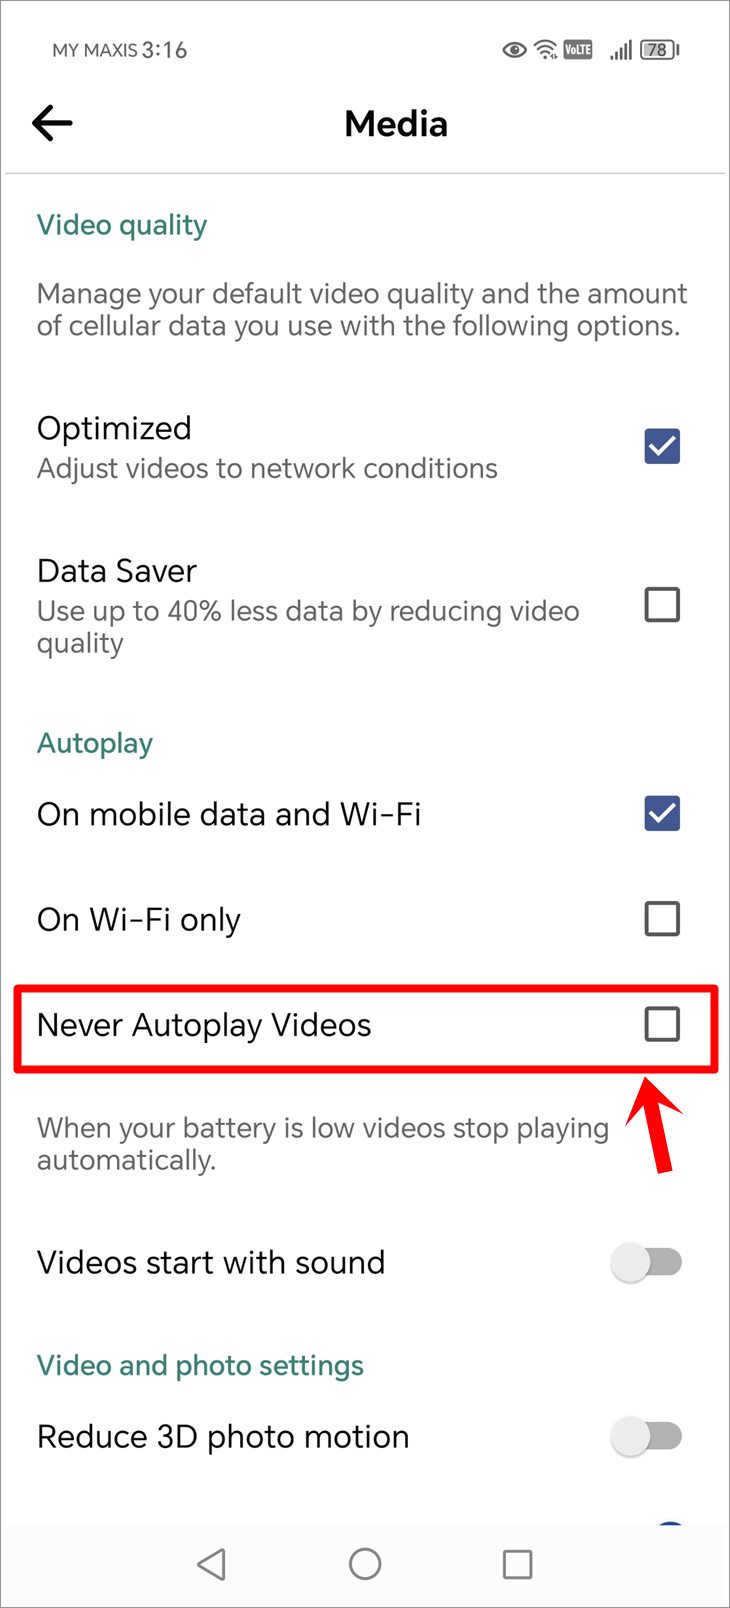 This is a mobile screenshot from the Facebook 'Media' page with the 'Never Autoplay Videos' option highlighted. 